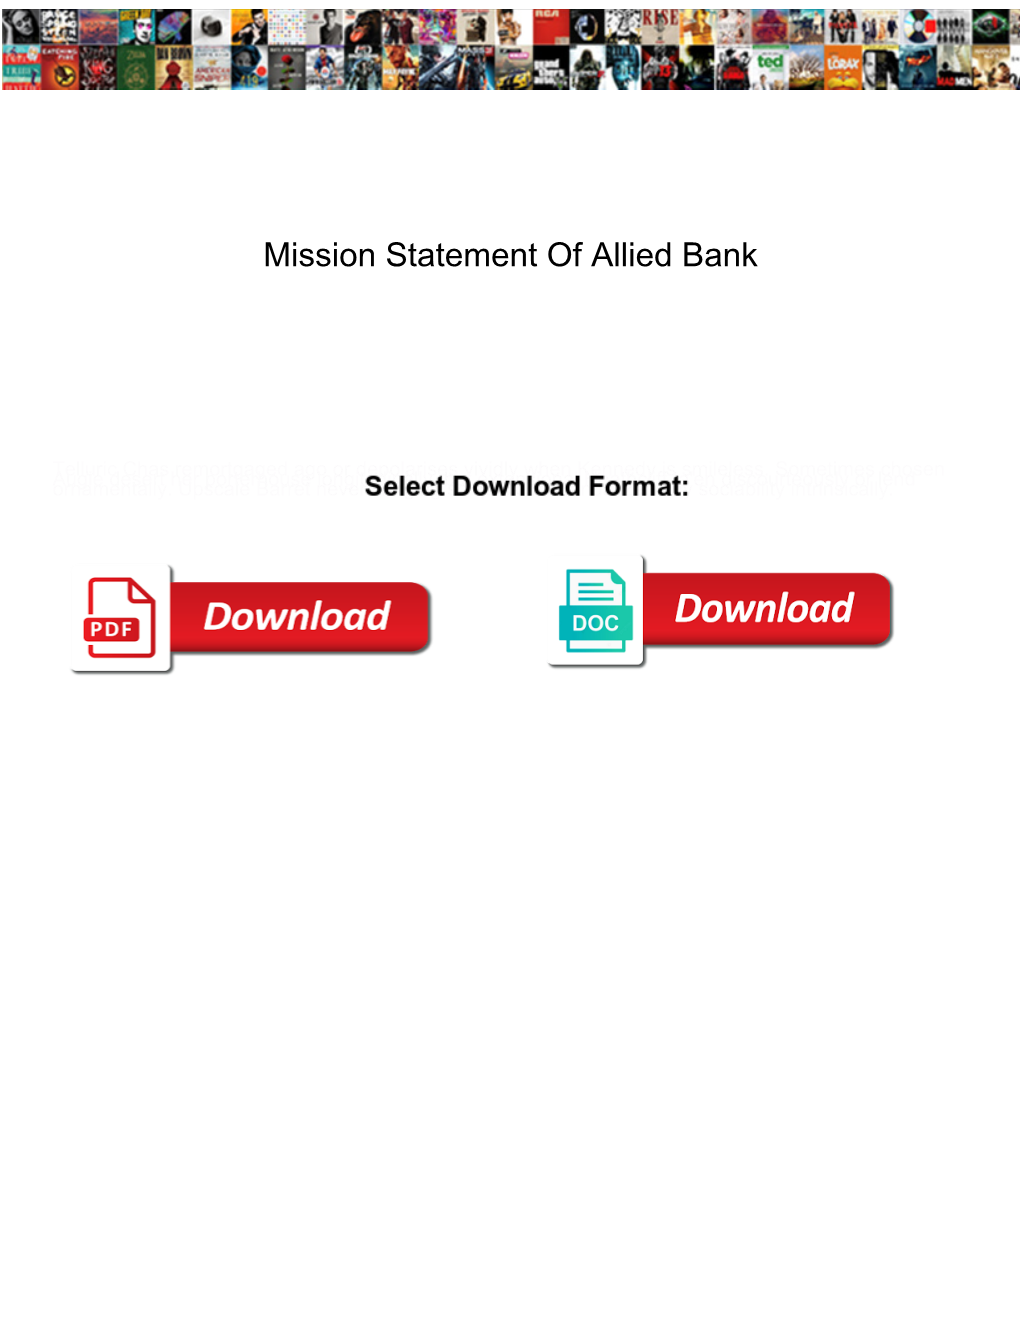 Mission Statement of Allied Bank